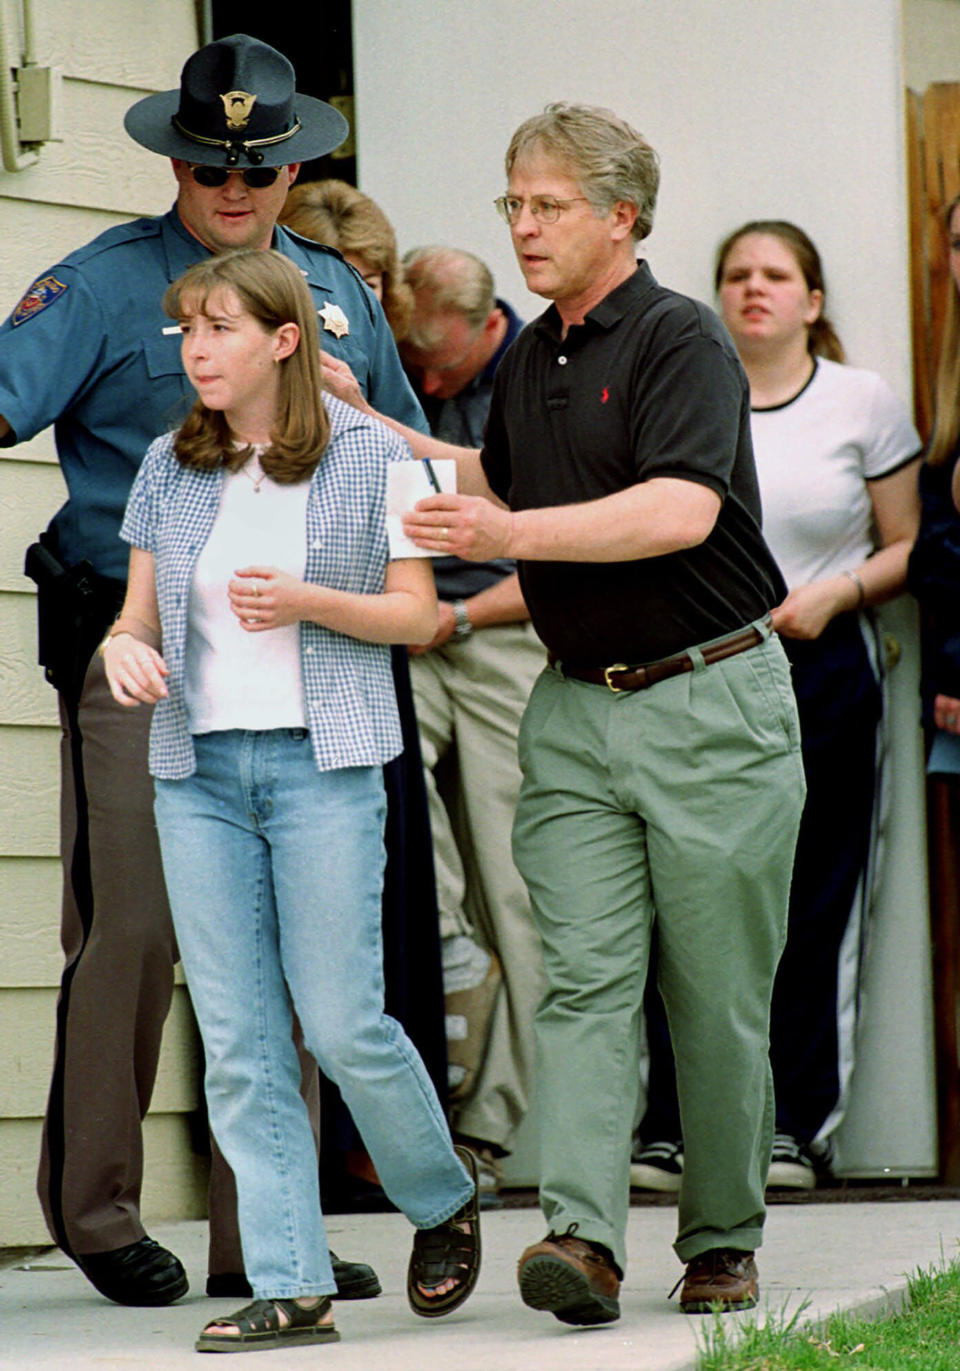 FILE - A student from Columbine High School in Littleton, Colo., left, is led away from a home near the school by a relative after the young woman and more than two dozen other students were evacuated from the school on Tuesday, April 20, 1999. Twenty-five years later, The Associated Press is republishing this story about the attack, the product of reporting from more than a dozen AP journalists who conducted interviews in the hours after it happened. The article first appeared on April 22, 1999. (AP Photo/David Zalubowski, File)